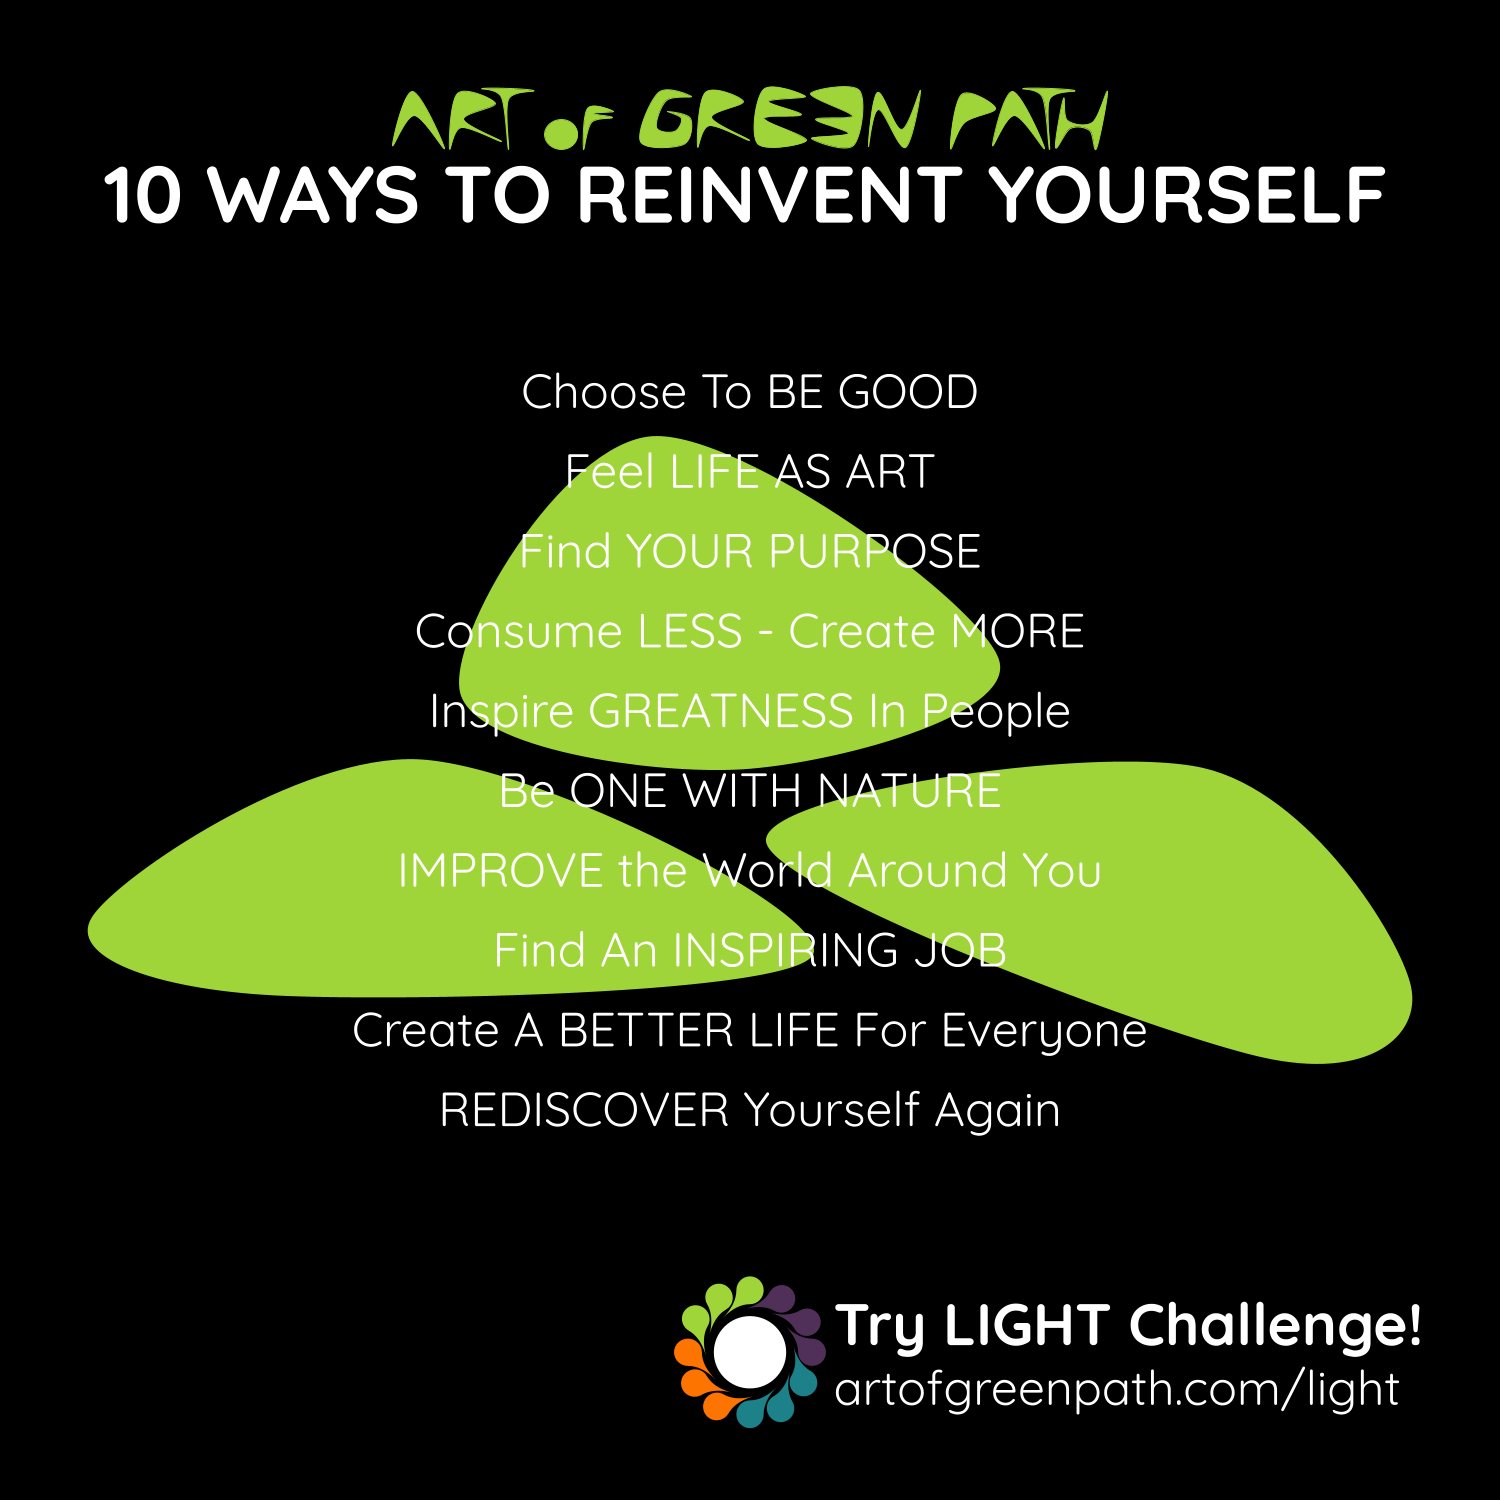 How To Reinvent Yourself - Your Life Change Guide - Art Of Green Path